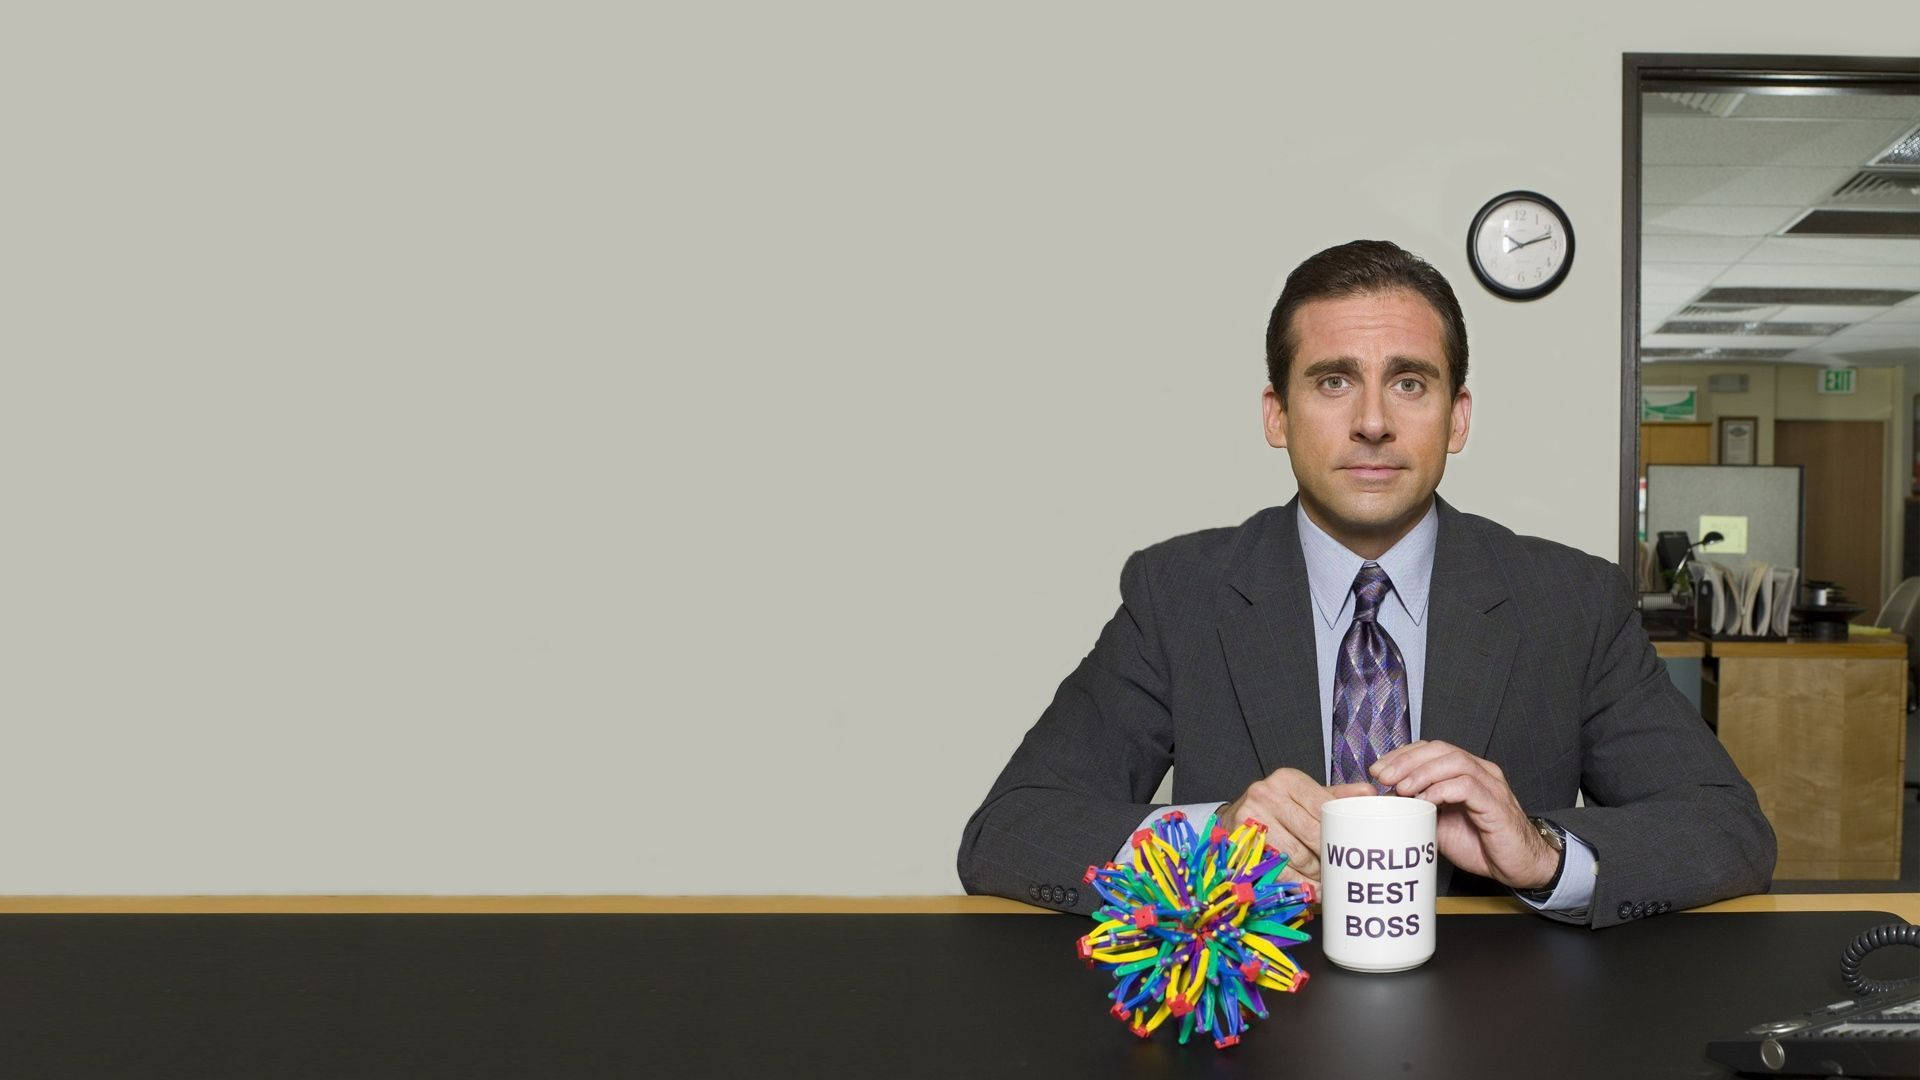 The Office Michael Best Boss Background